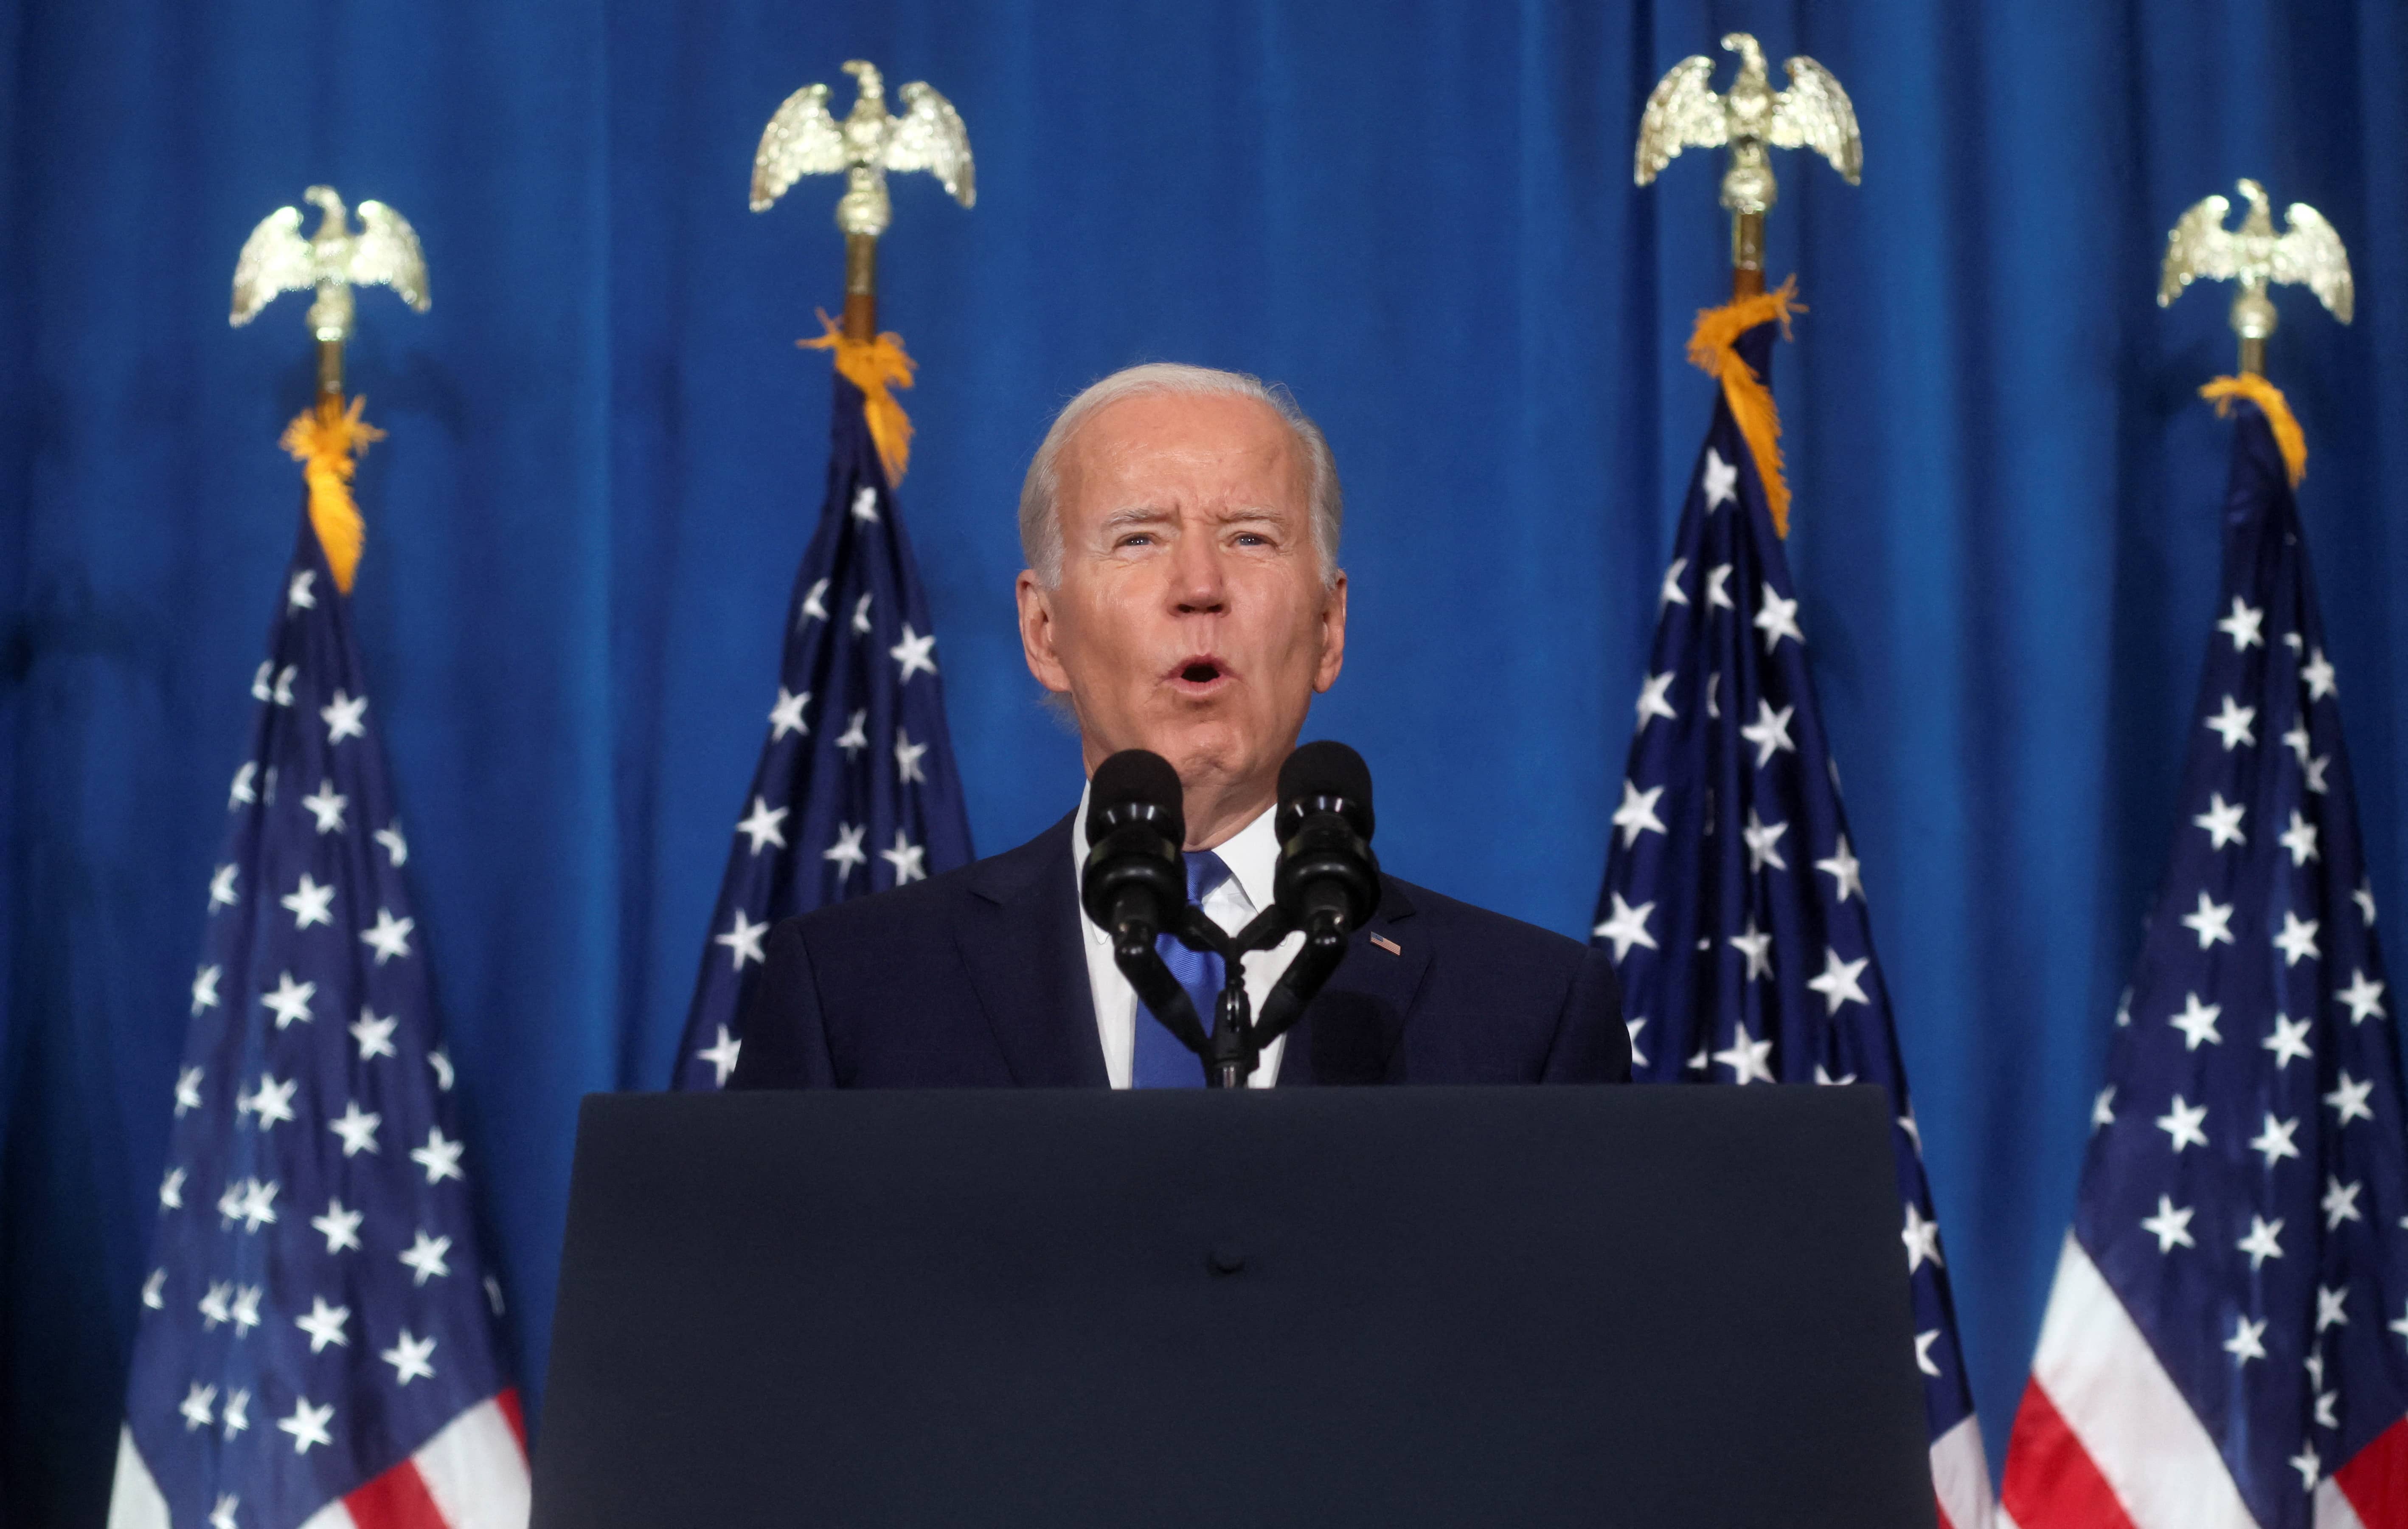 u-s-president-biden-speaks-during-a-democratic-national-committee-event-at-the-columbus-club-in-washington